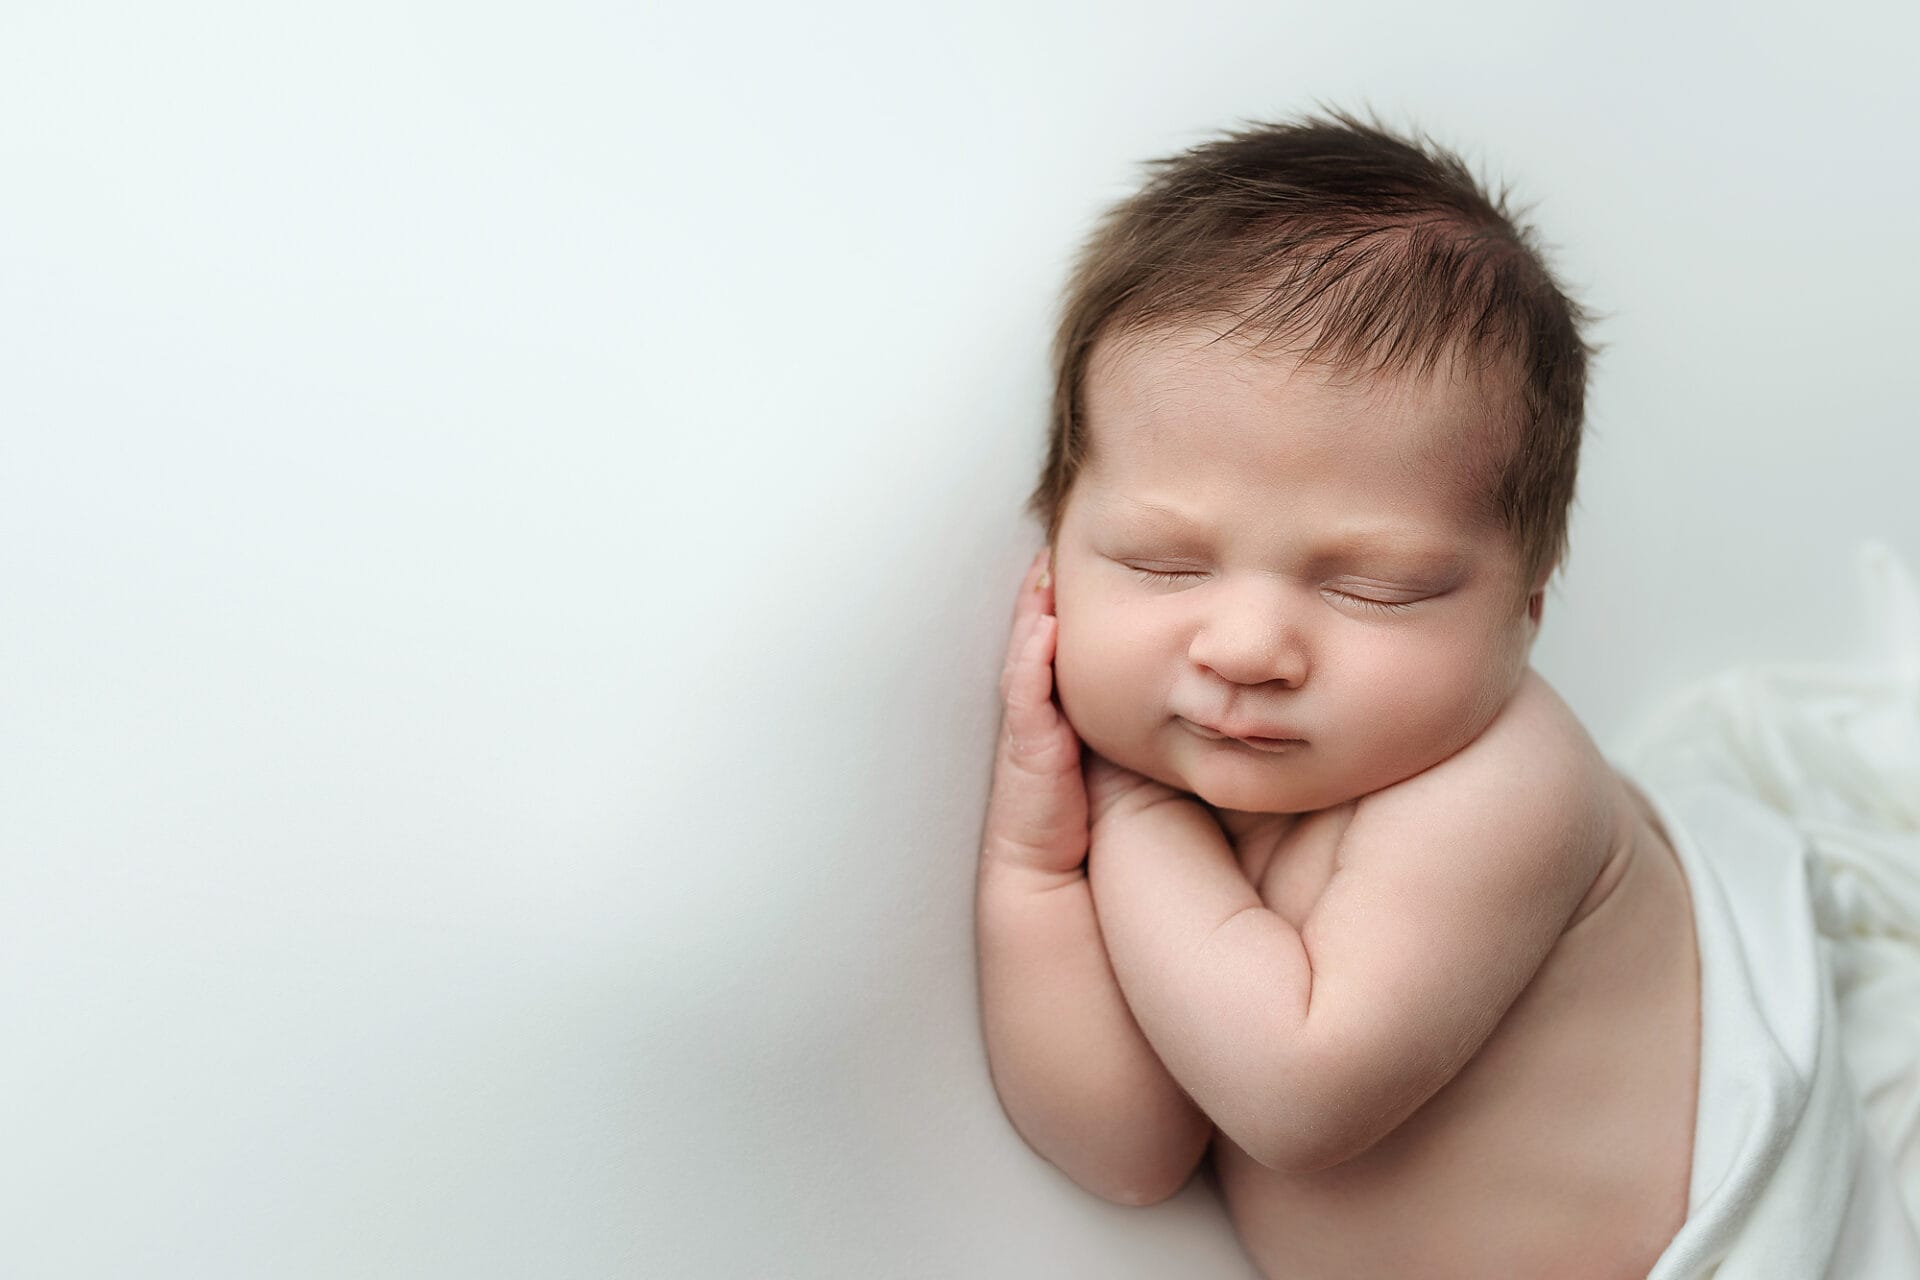 A newborn baby boy lying on a white backdrop with hands under his cheek.